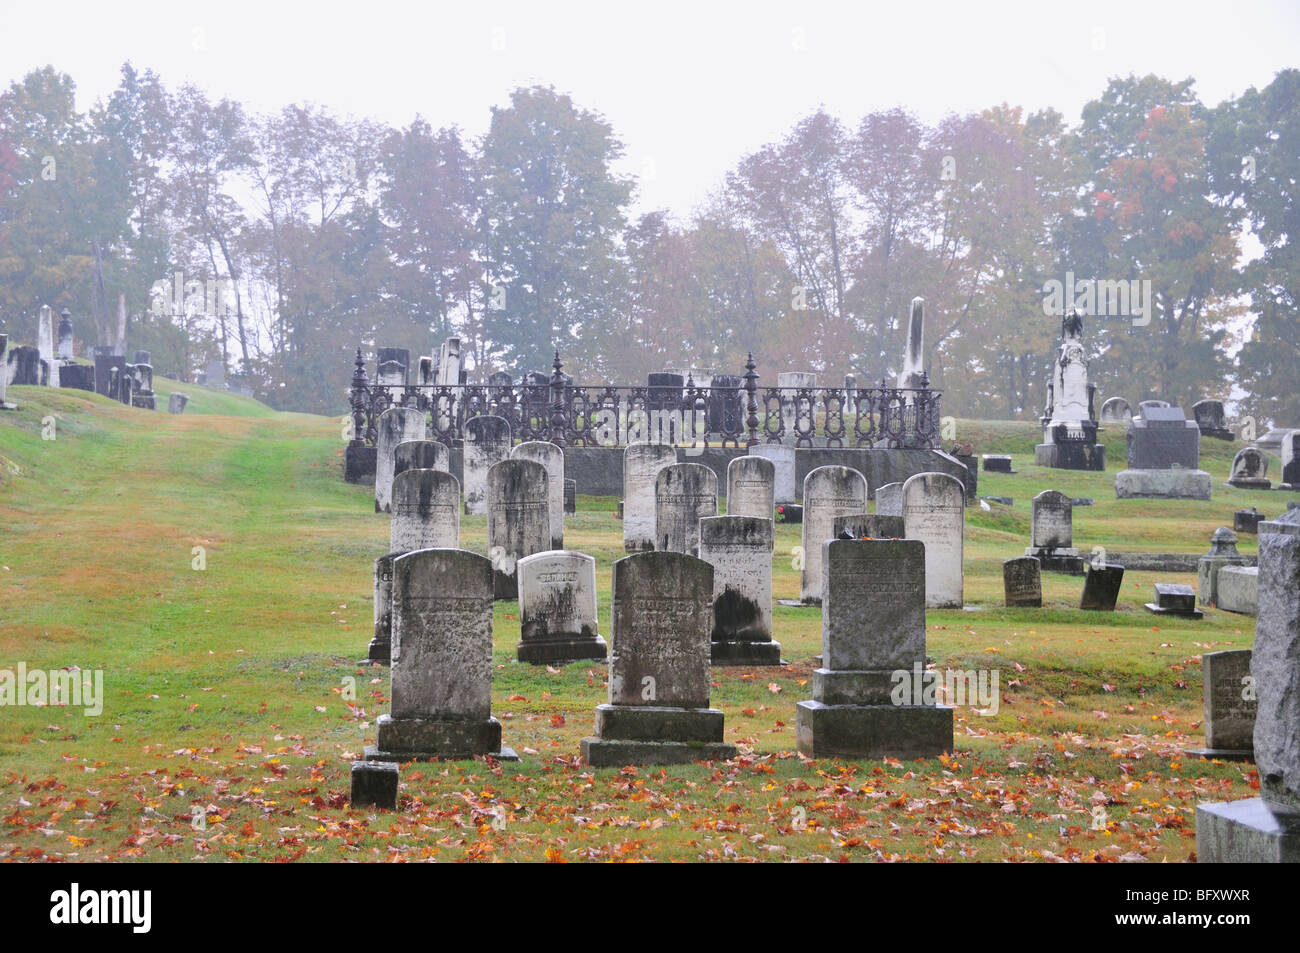 Rain and fog accentuates the spooky, mossy headstones in an old cemetery in Maine, USA. Stock Photo